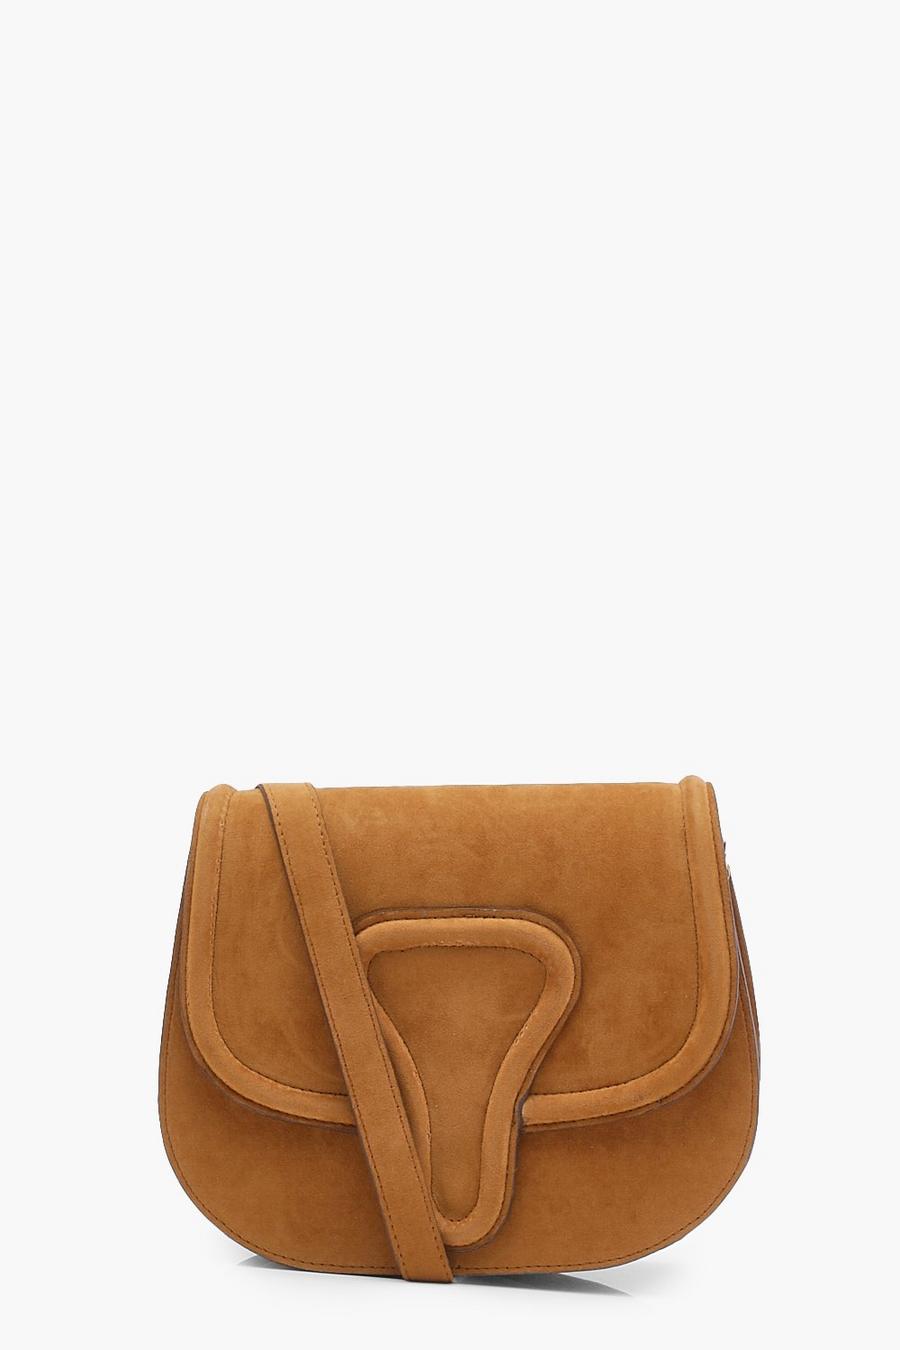 Tan Rounded Cross Body With Buckle Detail image number 1